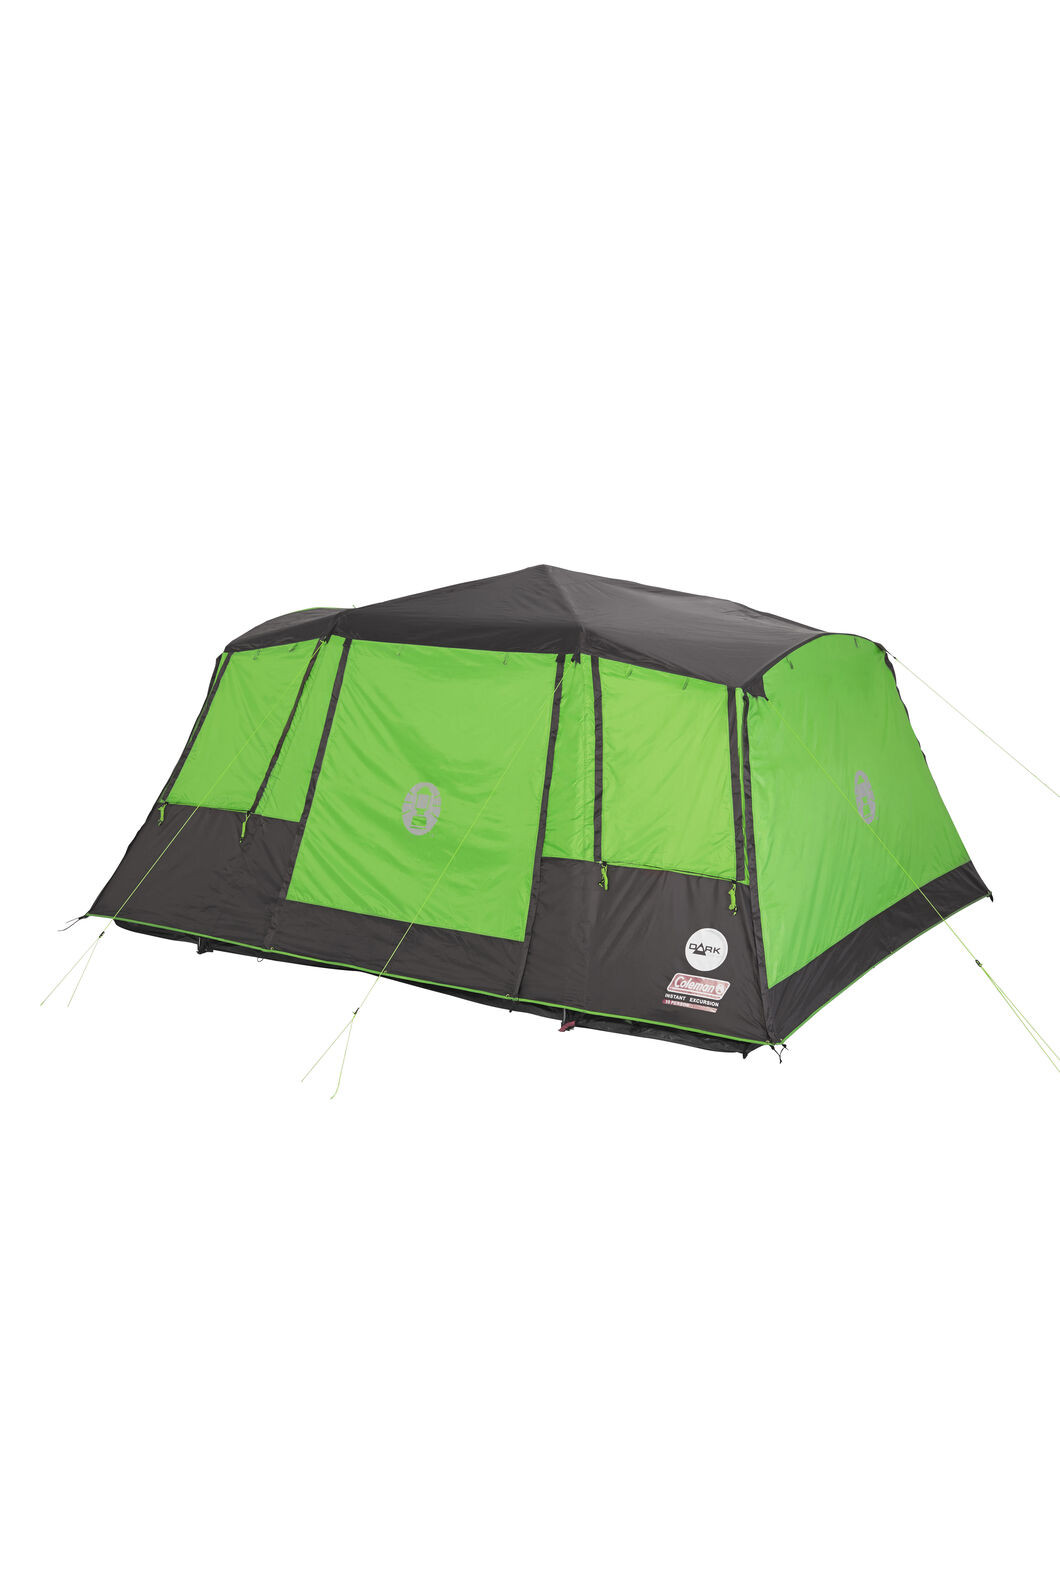 Hinterland 10 Person Instant Tent